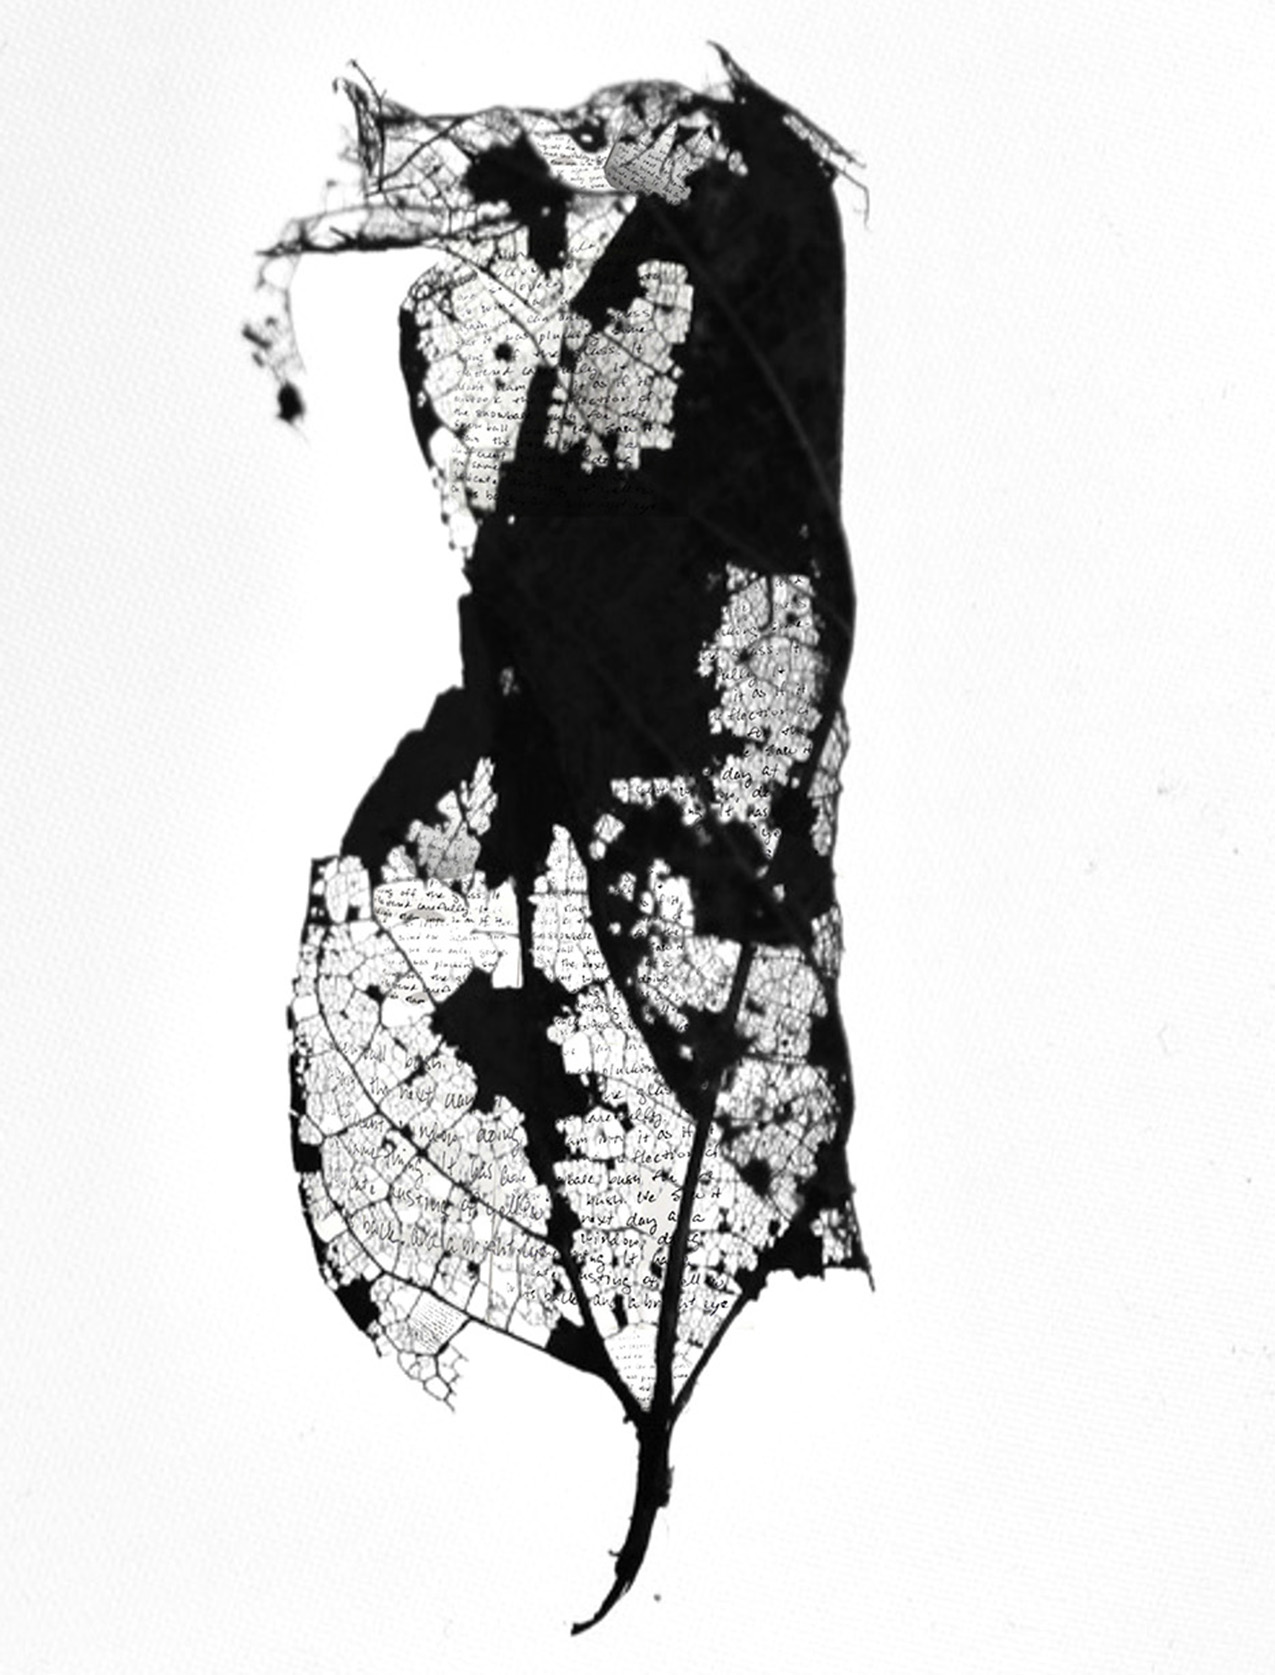 Black and white image of a disintegrating leaf with handwritten text showing through the holes